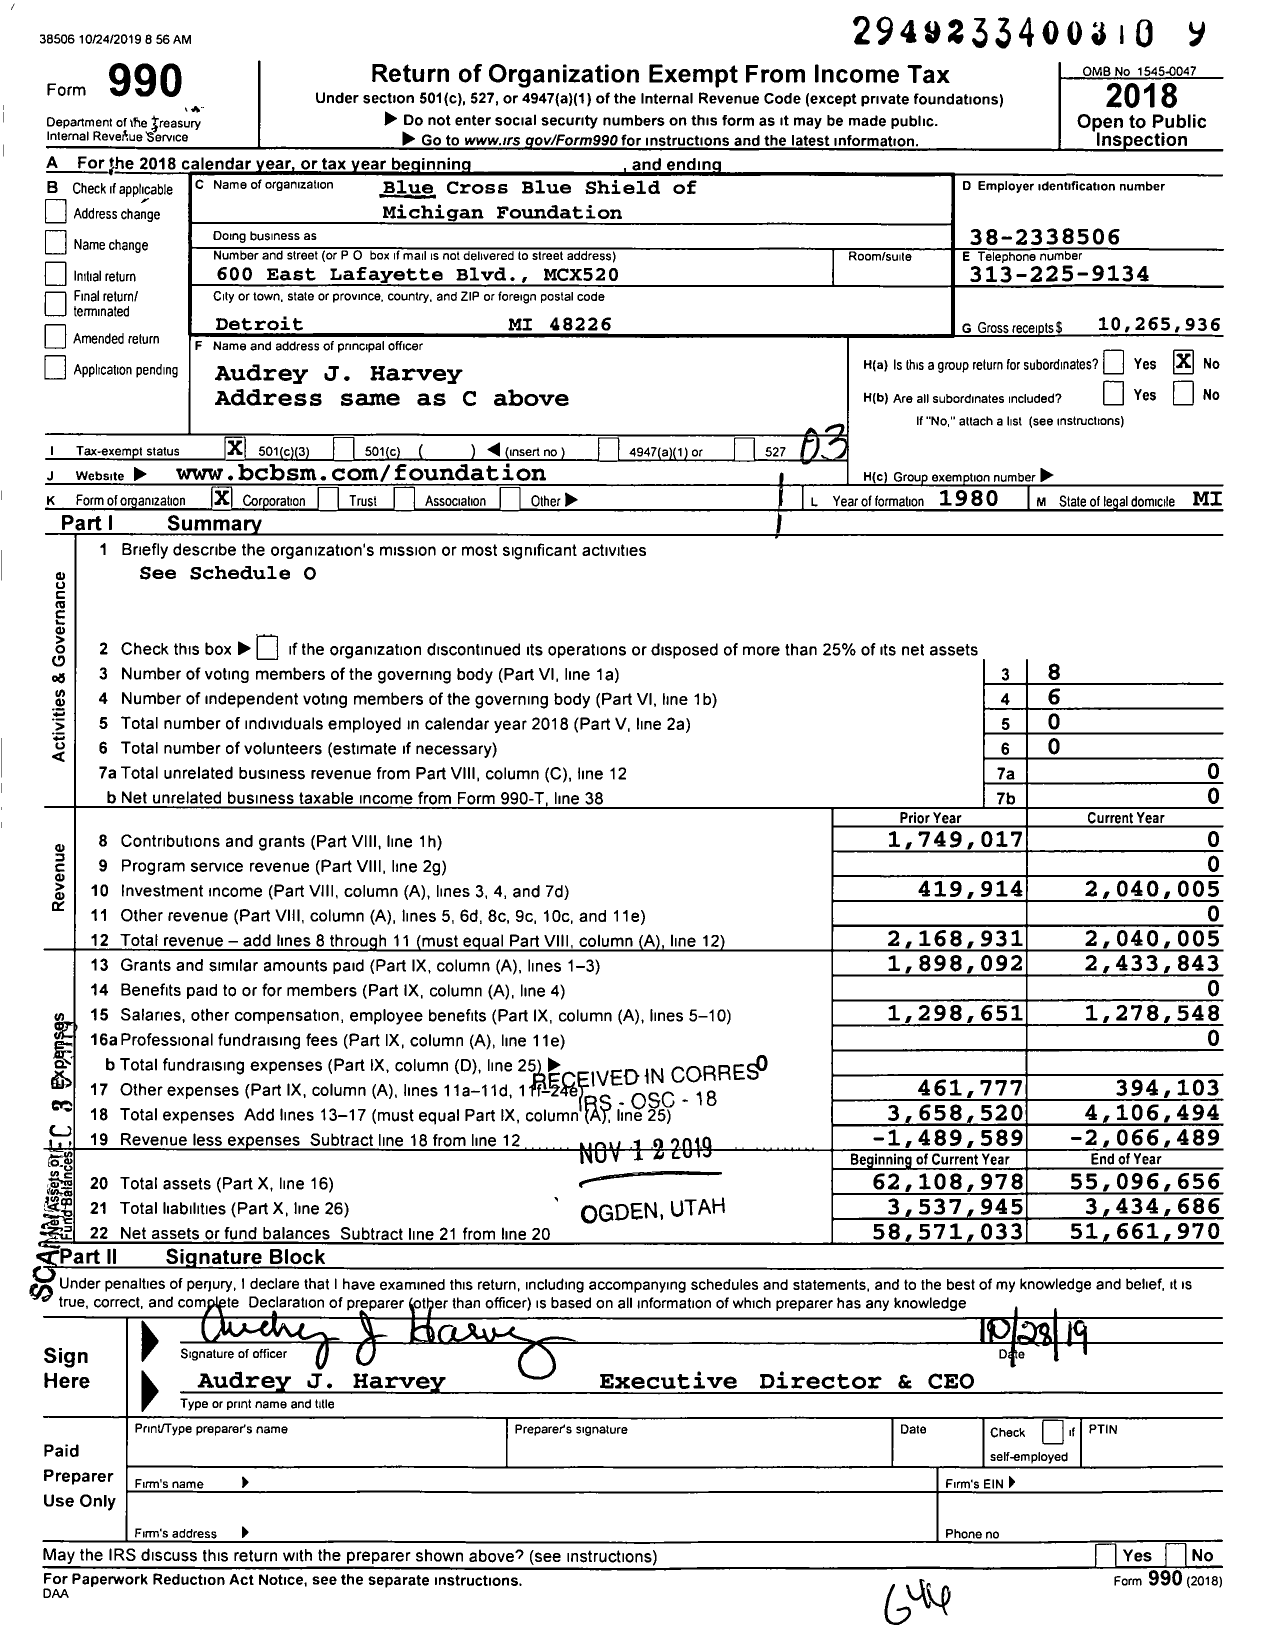 Image of first page of 2018 Form 990 for Blue Cross and Blue Shield of Michigan Foundation